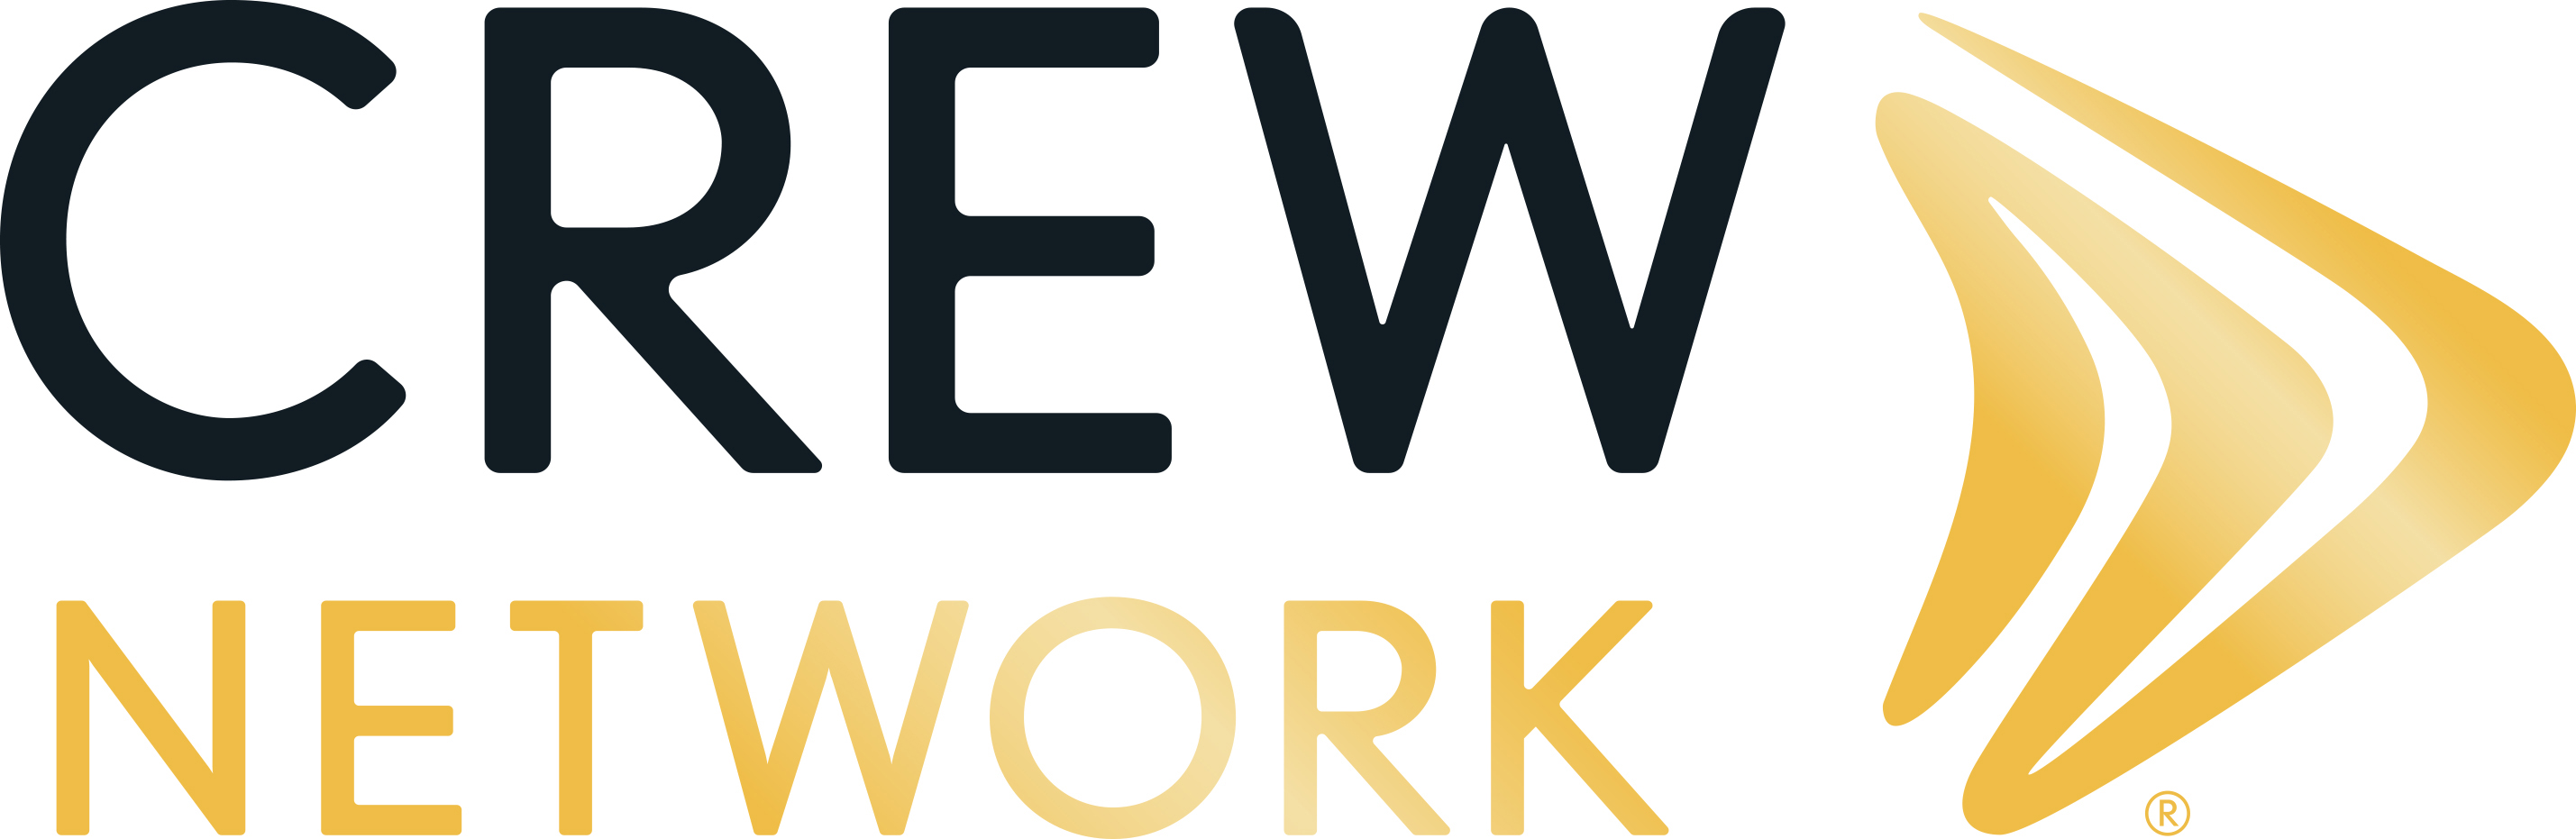 CREW Network Application/Nomination Forms logo